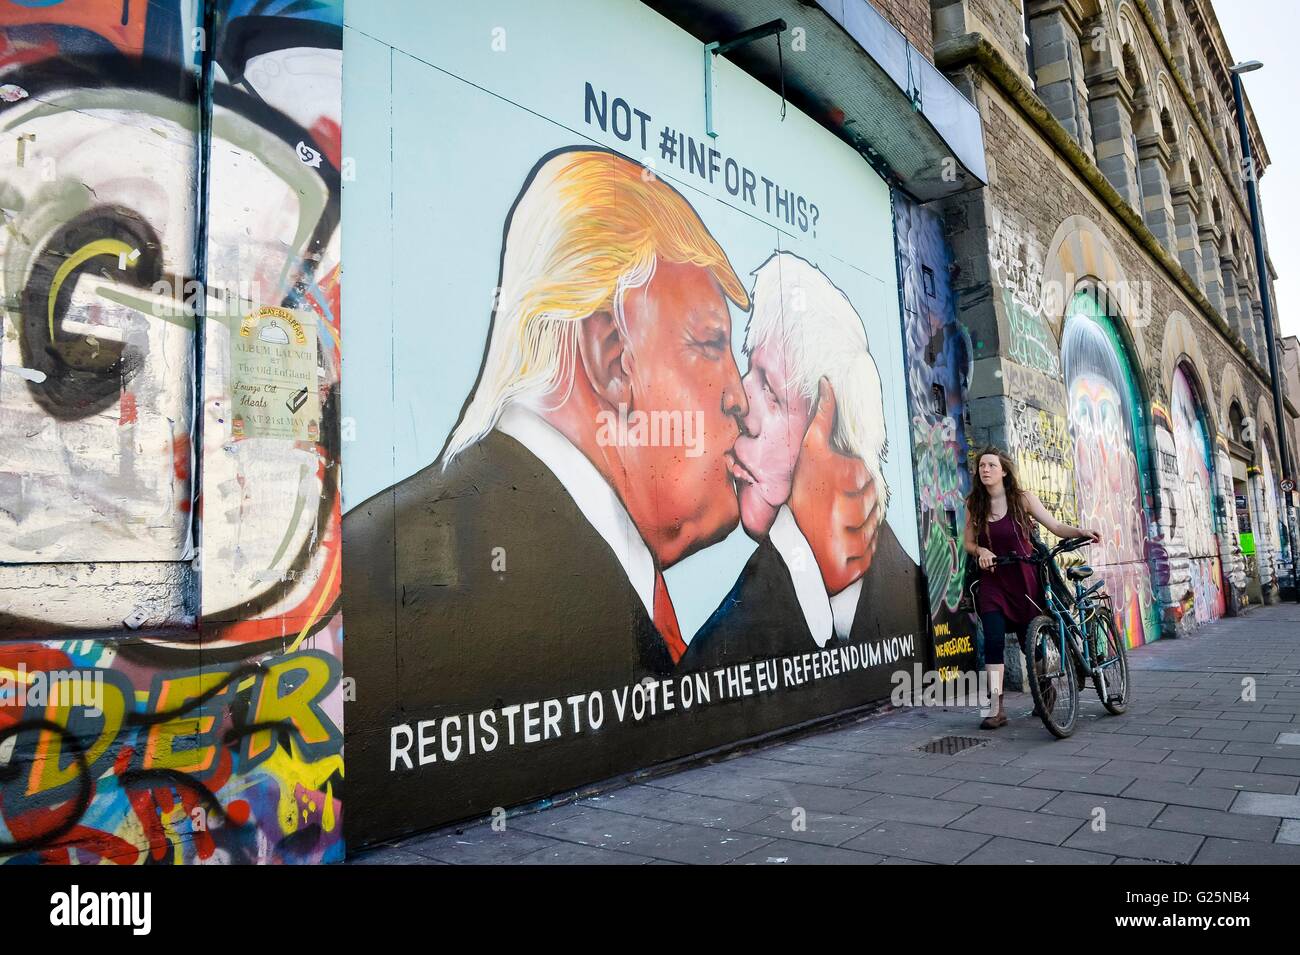 A woman walks past a graffiti mural of Donald Trump and Boris Johnson kissing, which is sprayed on a disused building in the Stokes Croft area of Bristol. Stock Photo